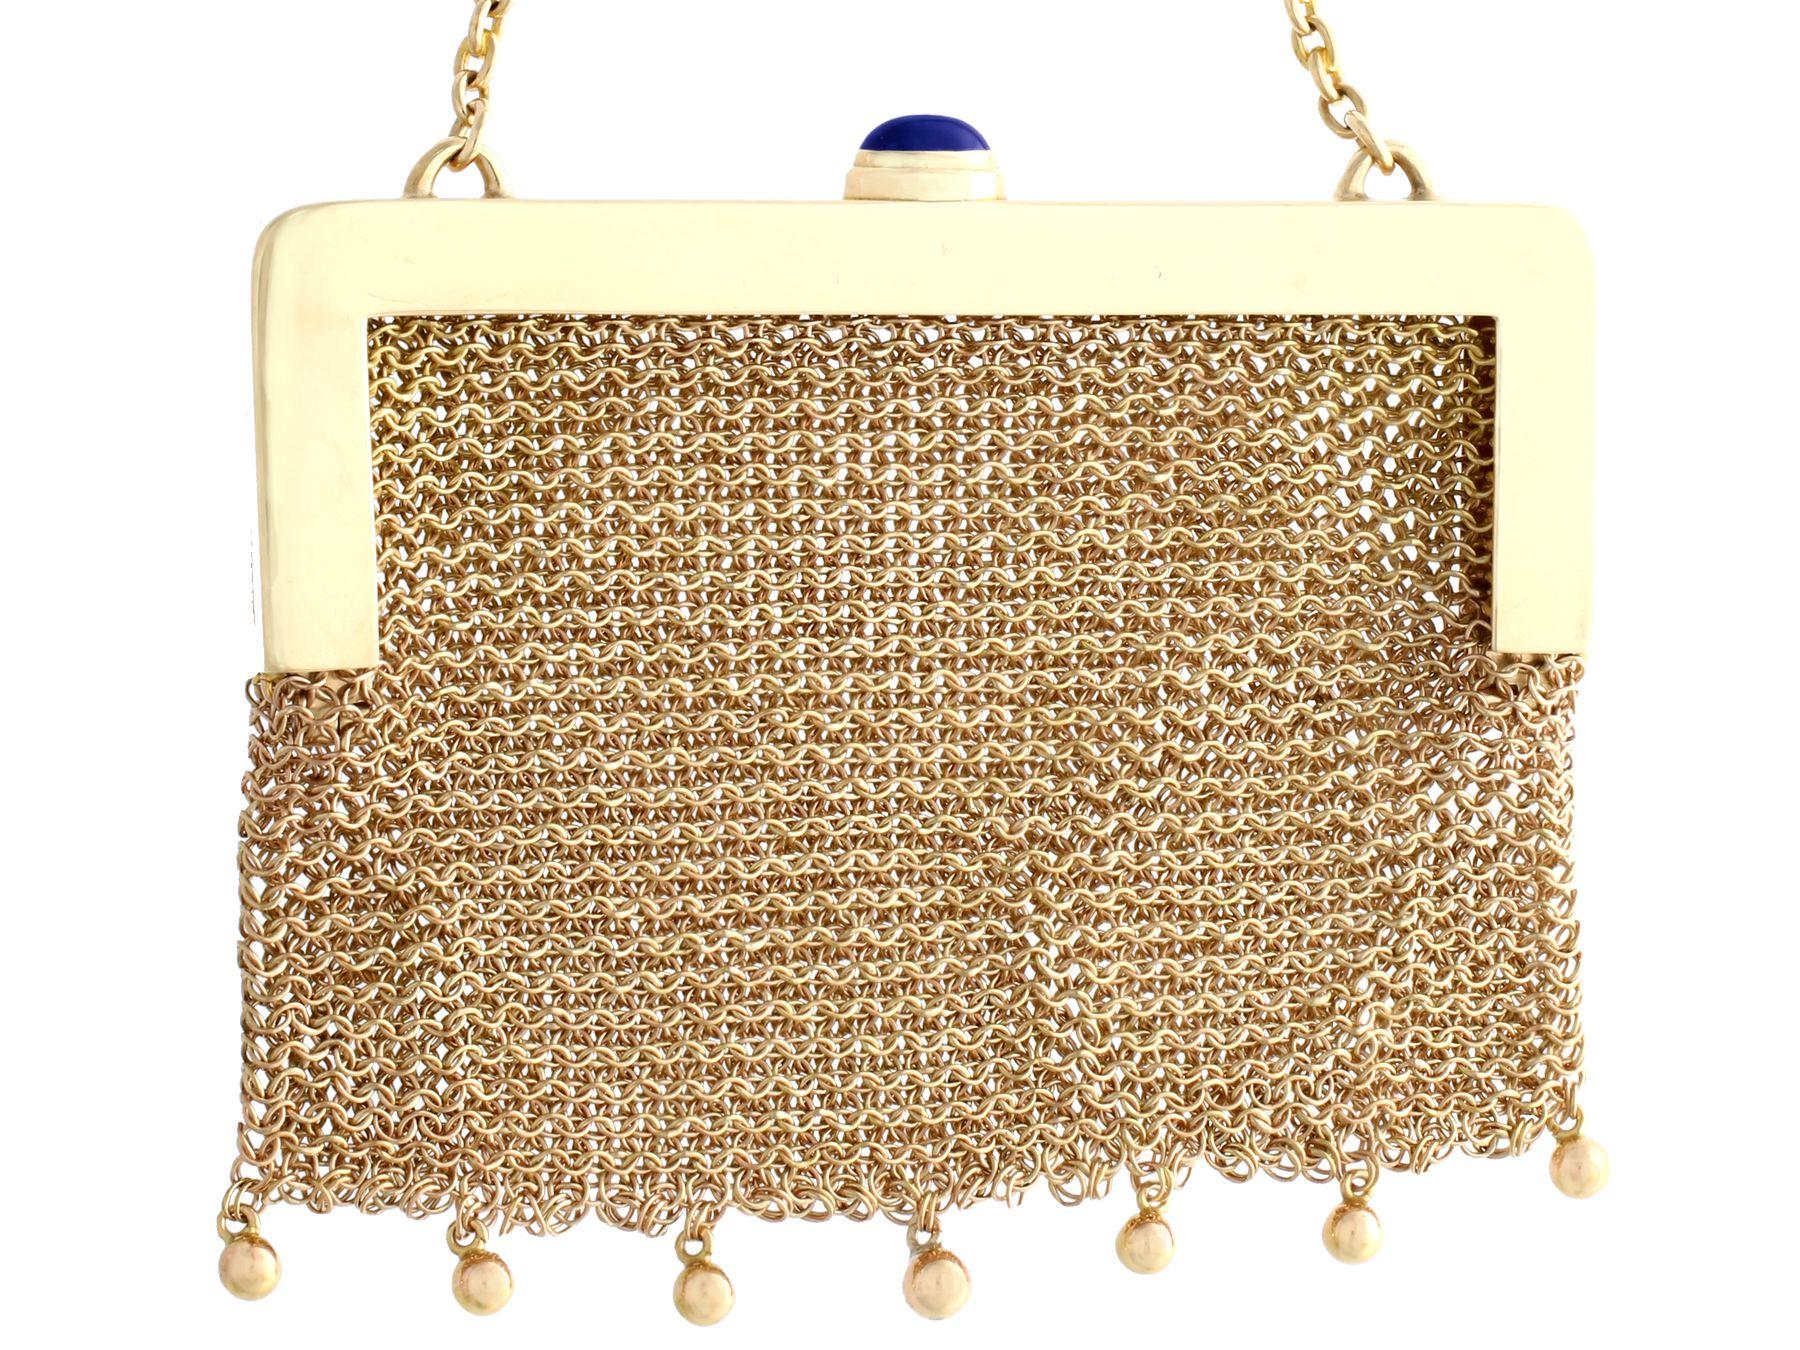 A stunning antique 0.68 carat sapphire and 0.32 carat ruby, 0.21 carat diamond and 14 karat yellow gold purse; part of our diverse antique jewelry and estate jewelry collections.

This fine and impressive antique mesh purse has been crafted in 14k